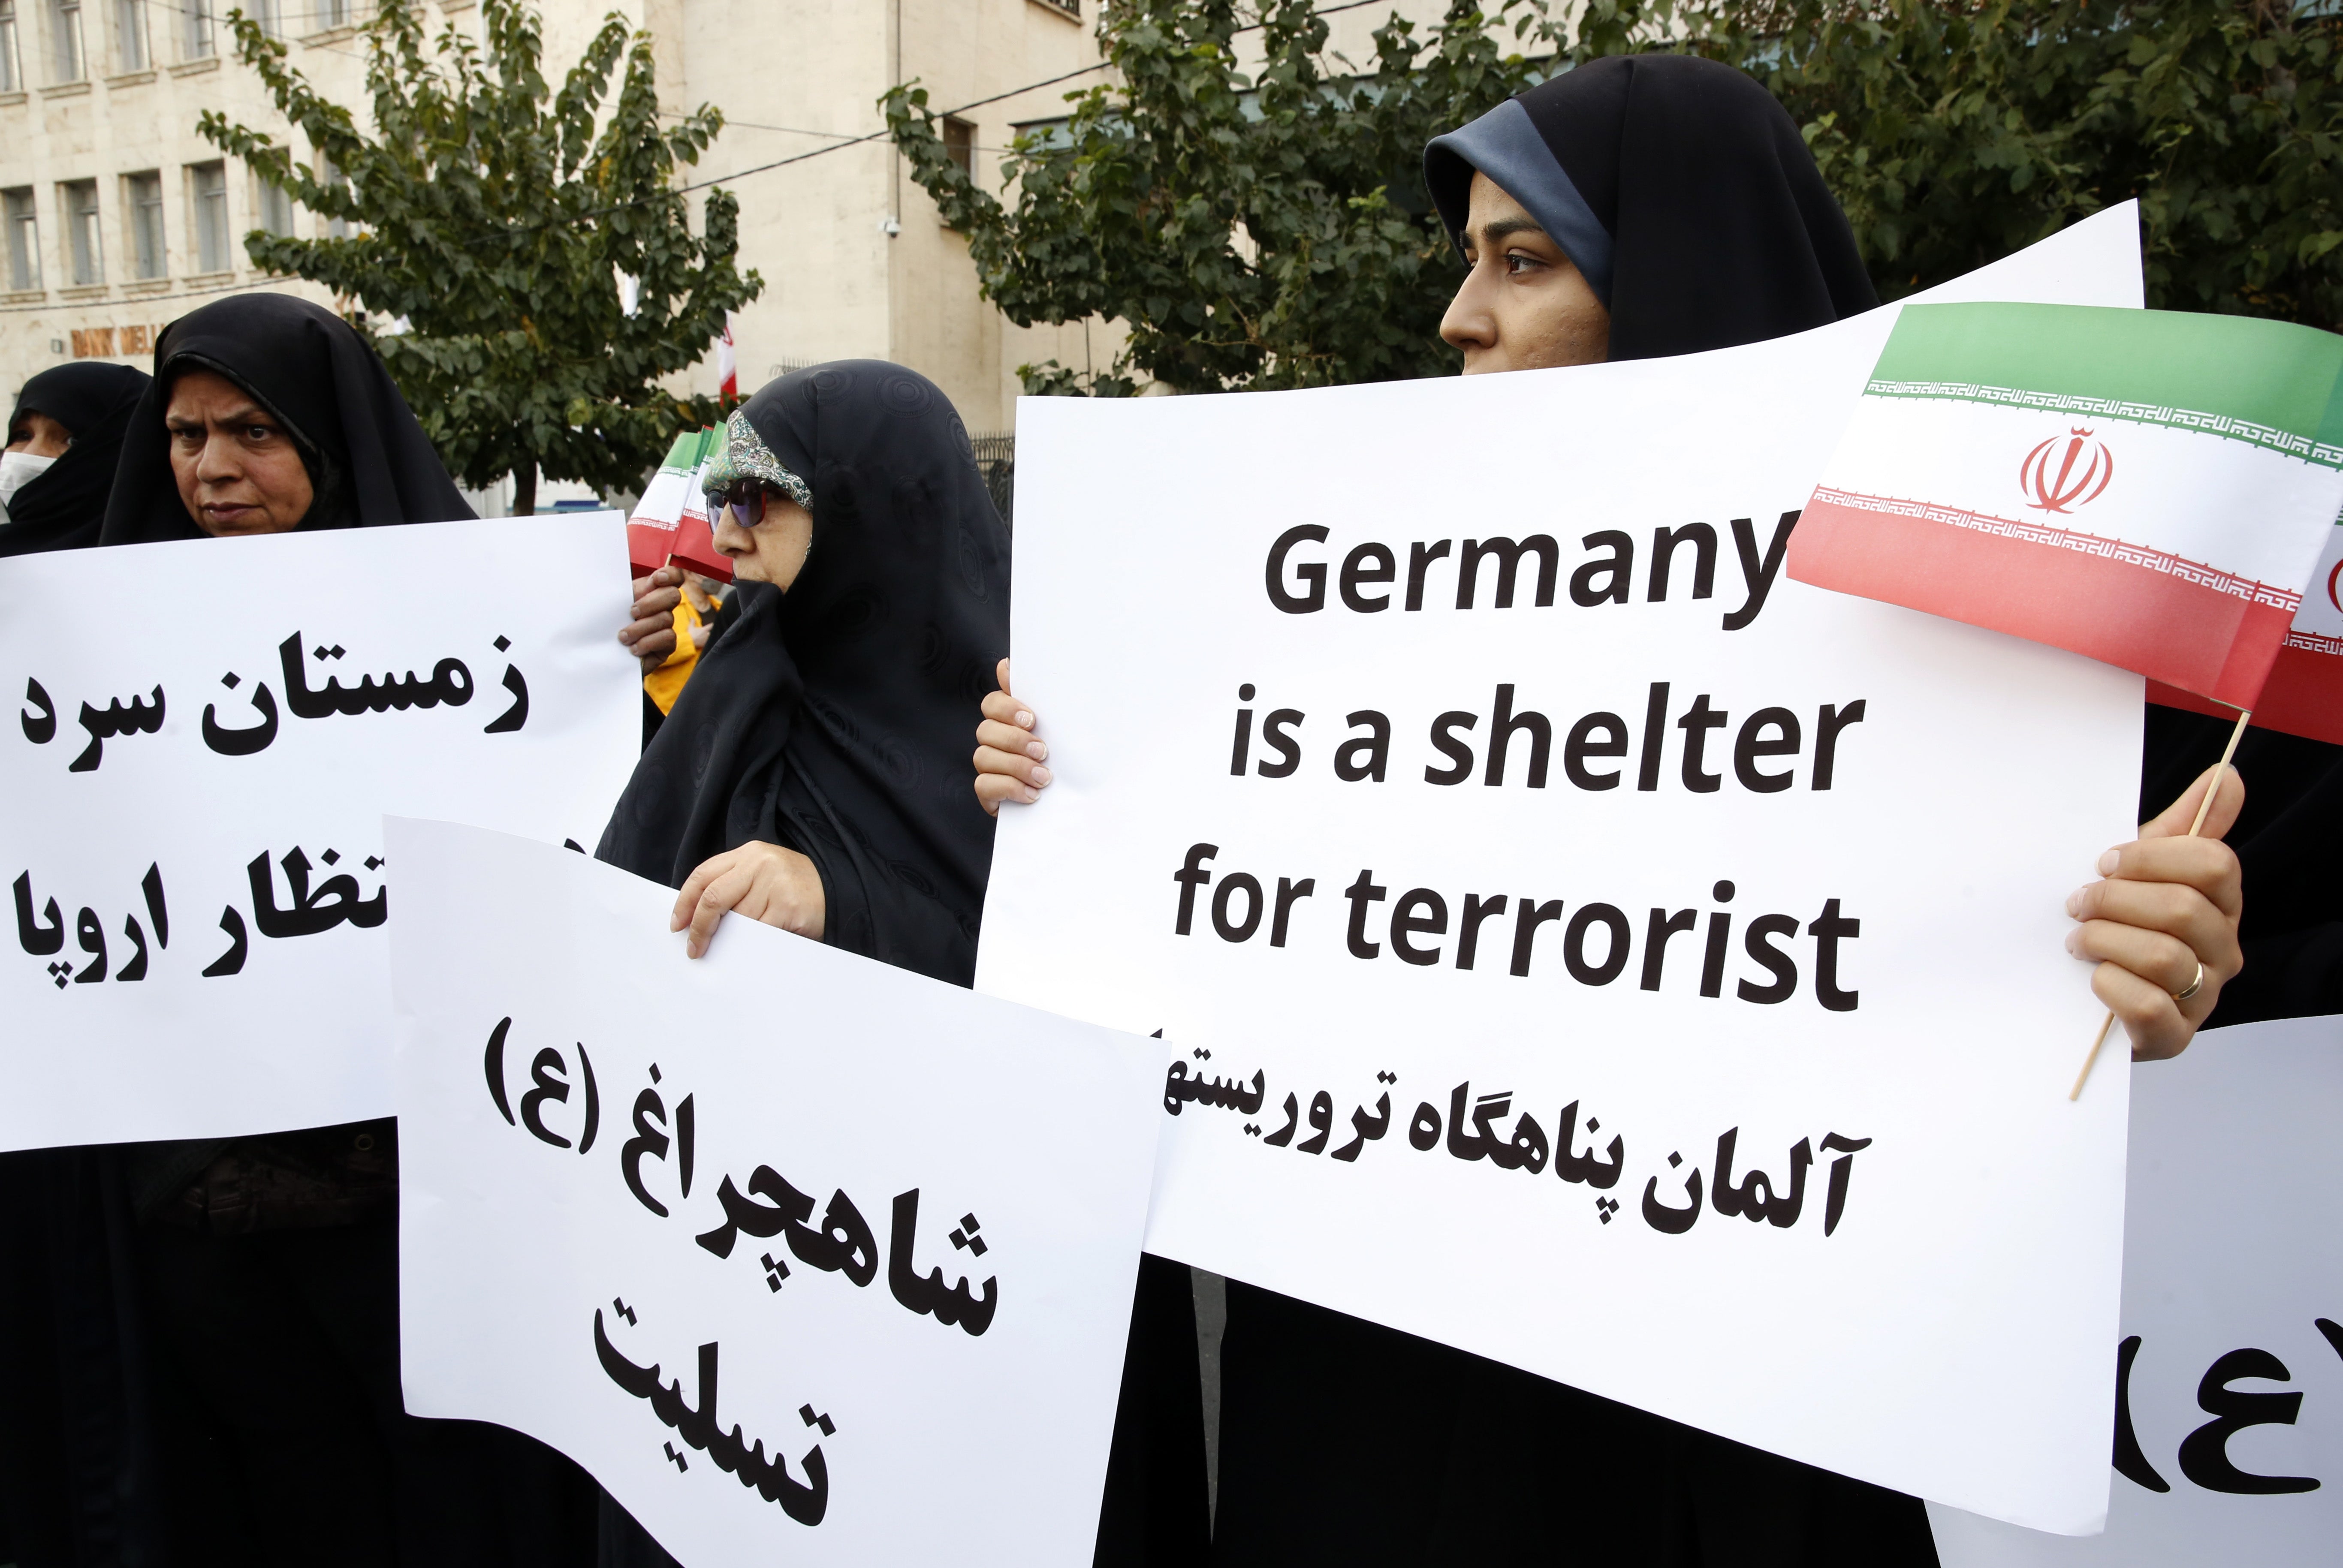 Iranians take part during an anti-Germany protest in front of the German embassy in Tehran on Tuesday